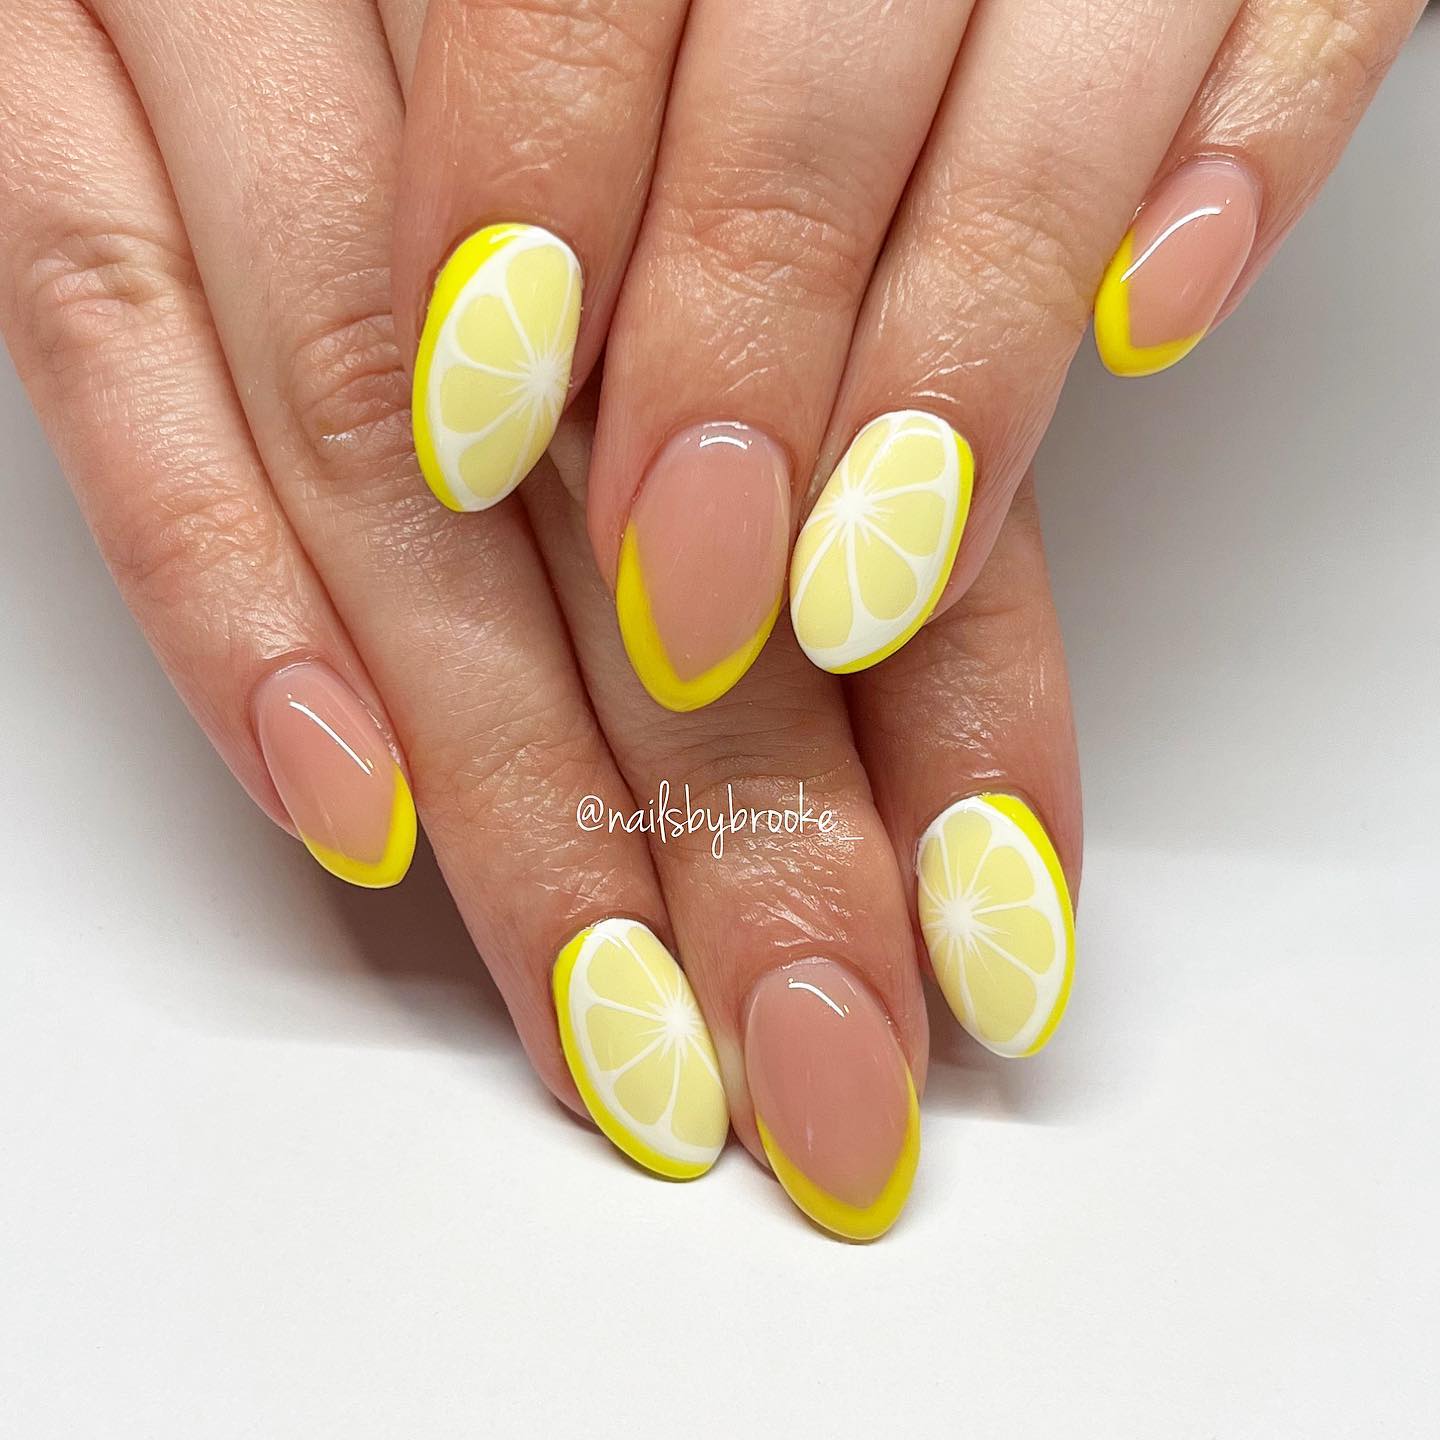 Yellow French Tip Nails With Lemon Design on main and ring nails